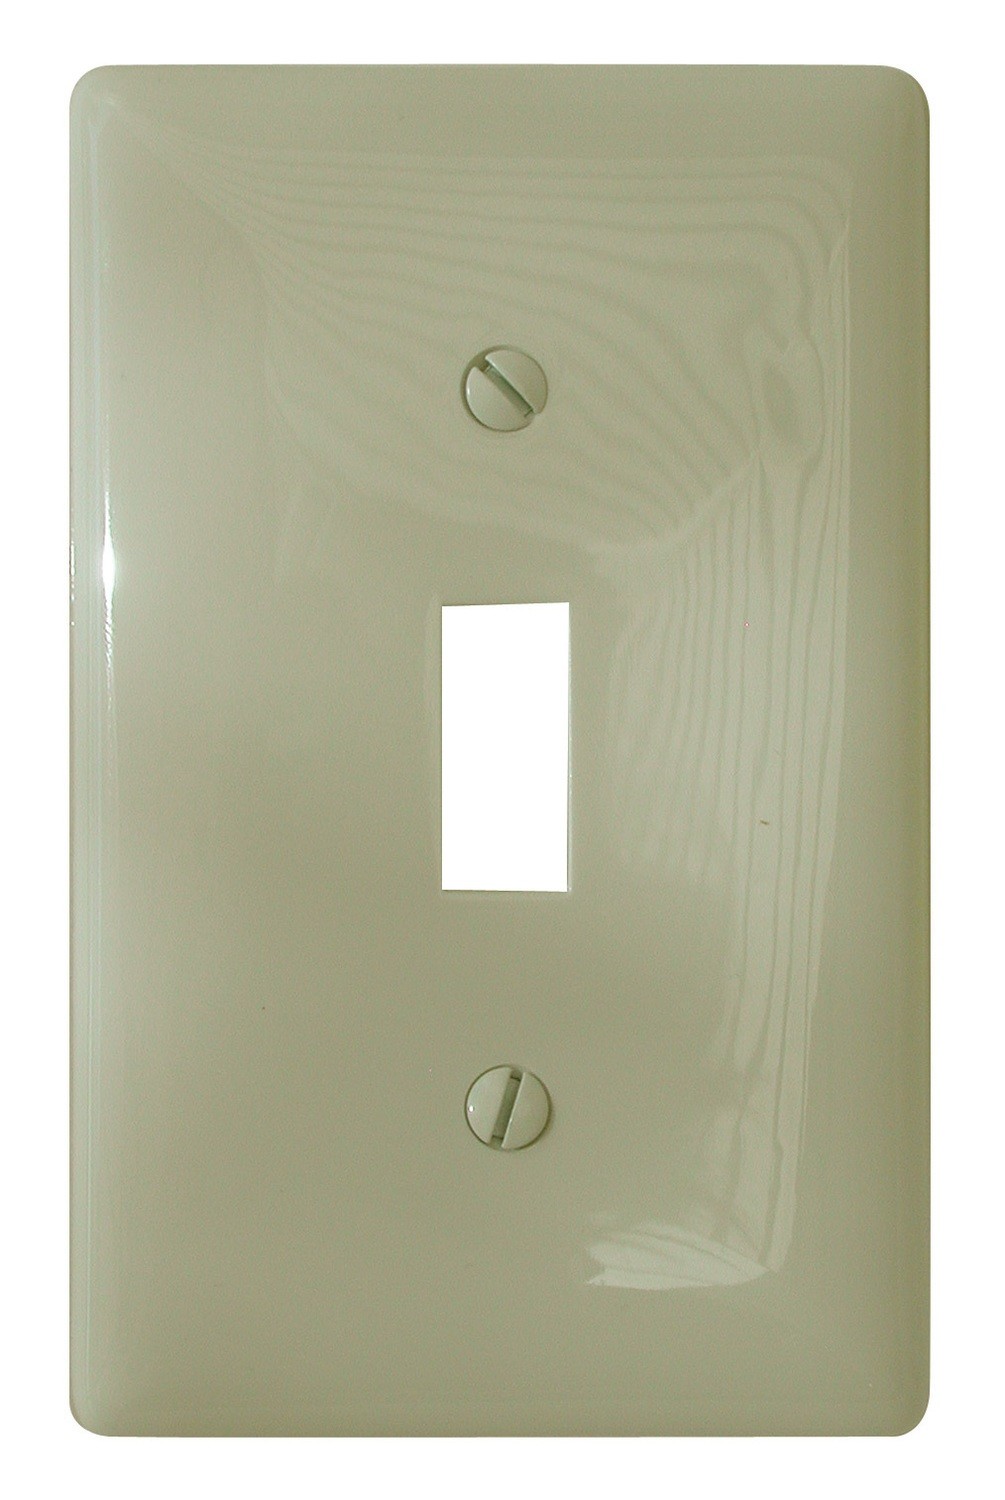 Toggle Switch Cover - Ivory